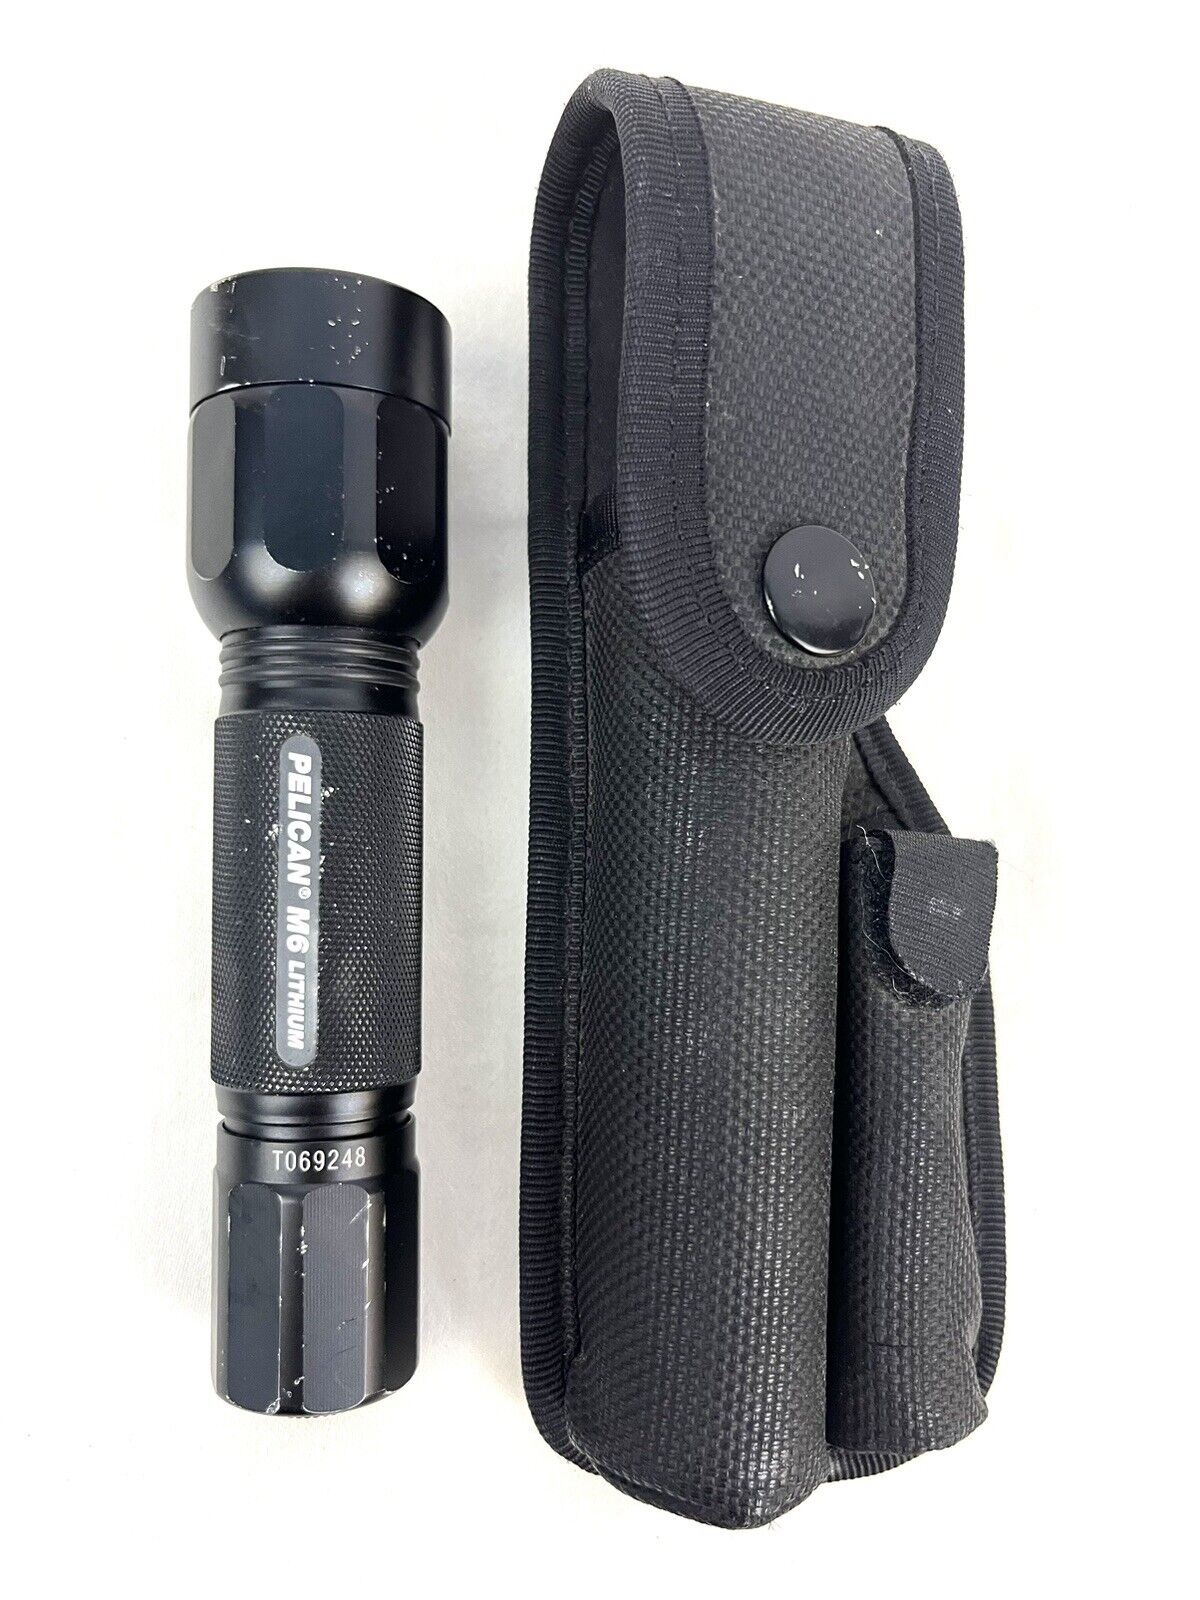 ~ US MILITARY PELICAN M6 2320 TACTICAL FLASHLIGHT W/ HOLSTER MADE IN USA